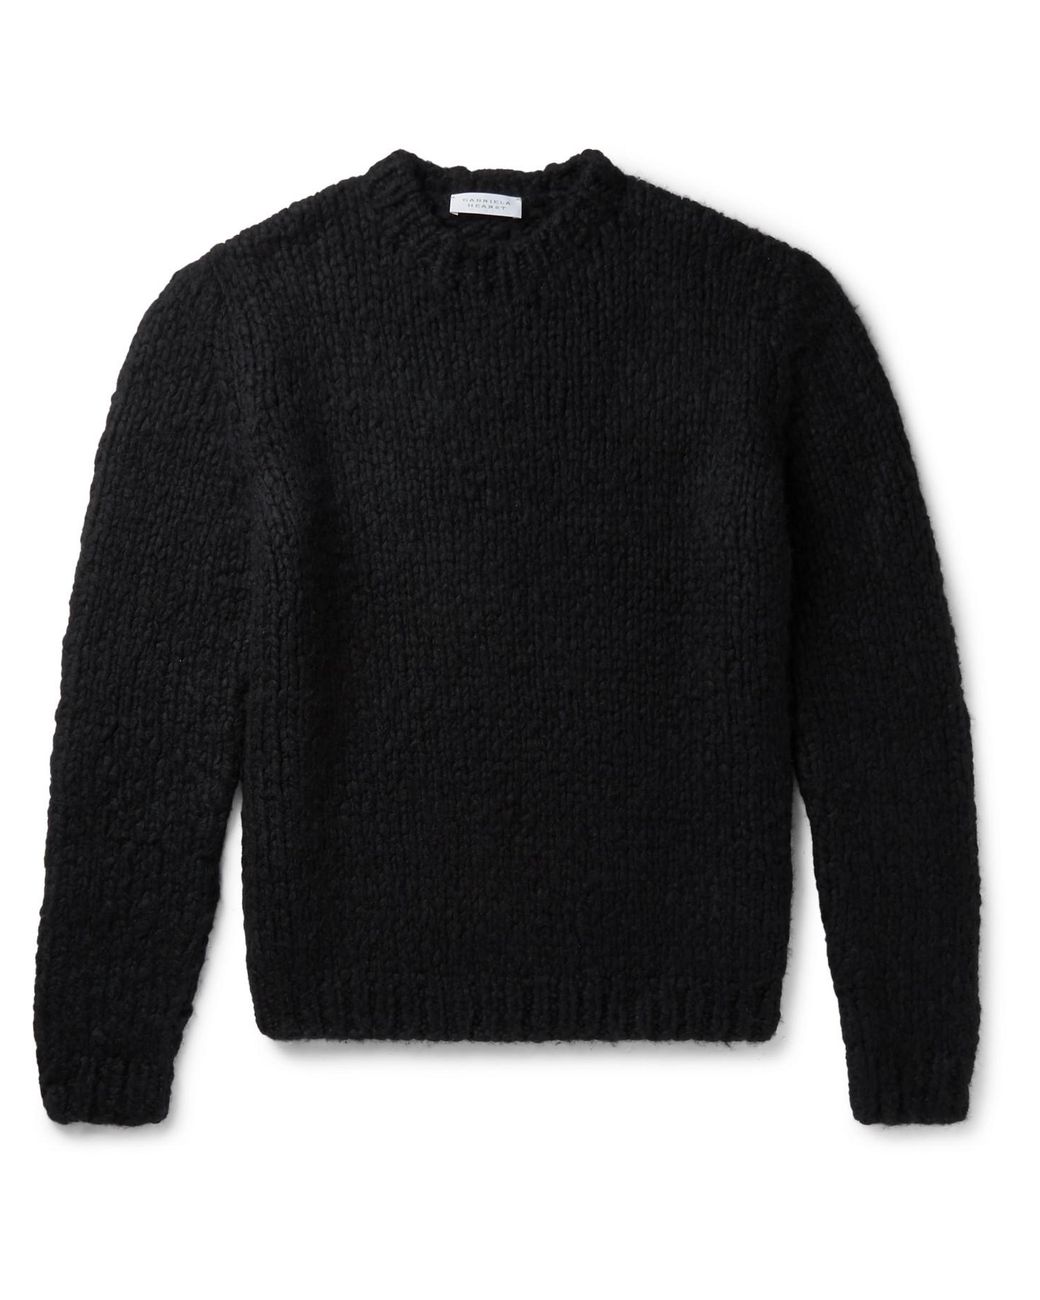 Gabriela Hearst Lawrence Cashmere Sweater in Black for Men - Lyst